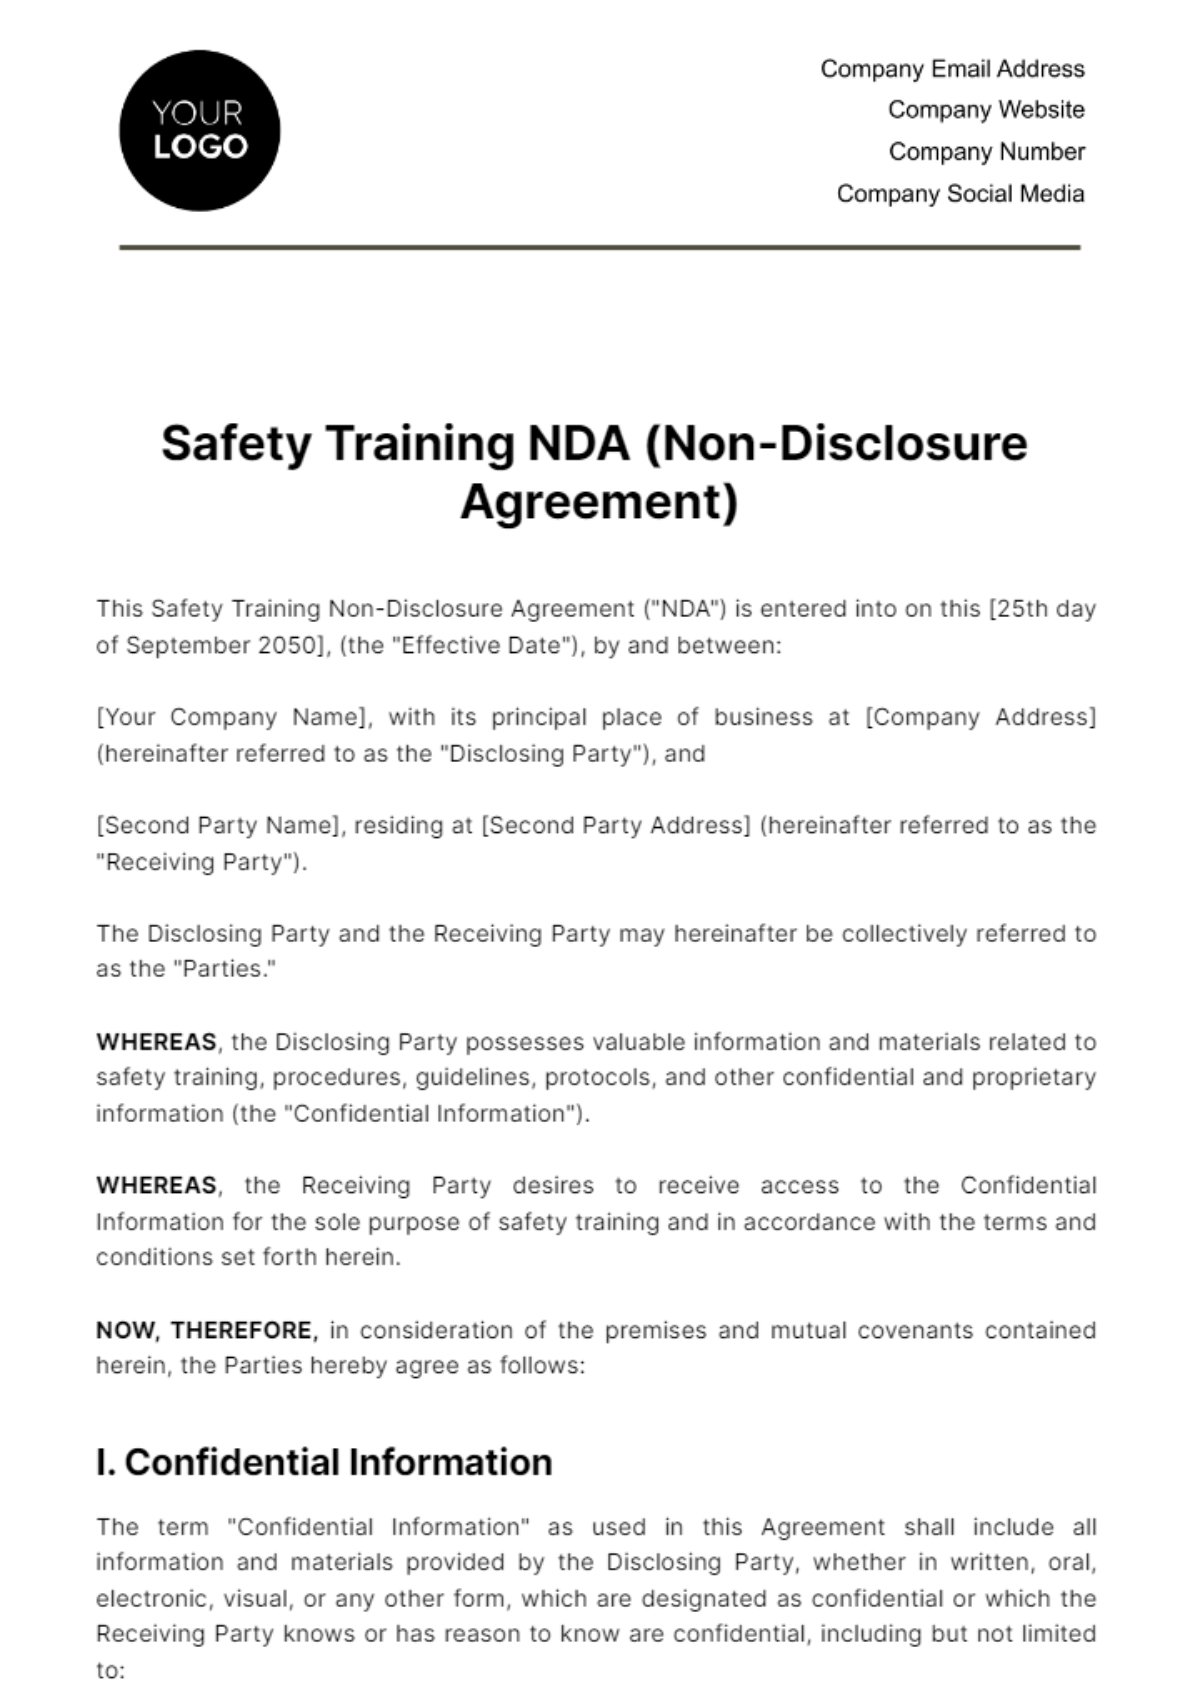 Free Safety Training NDA (Non-Disclosure Agreement) HR Template